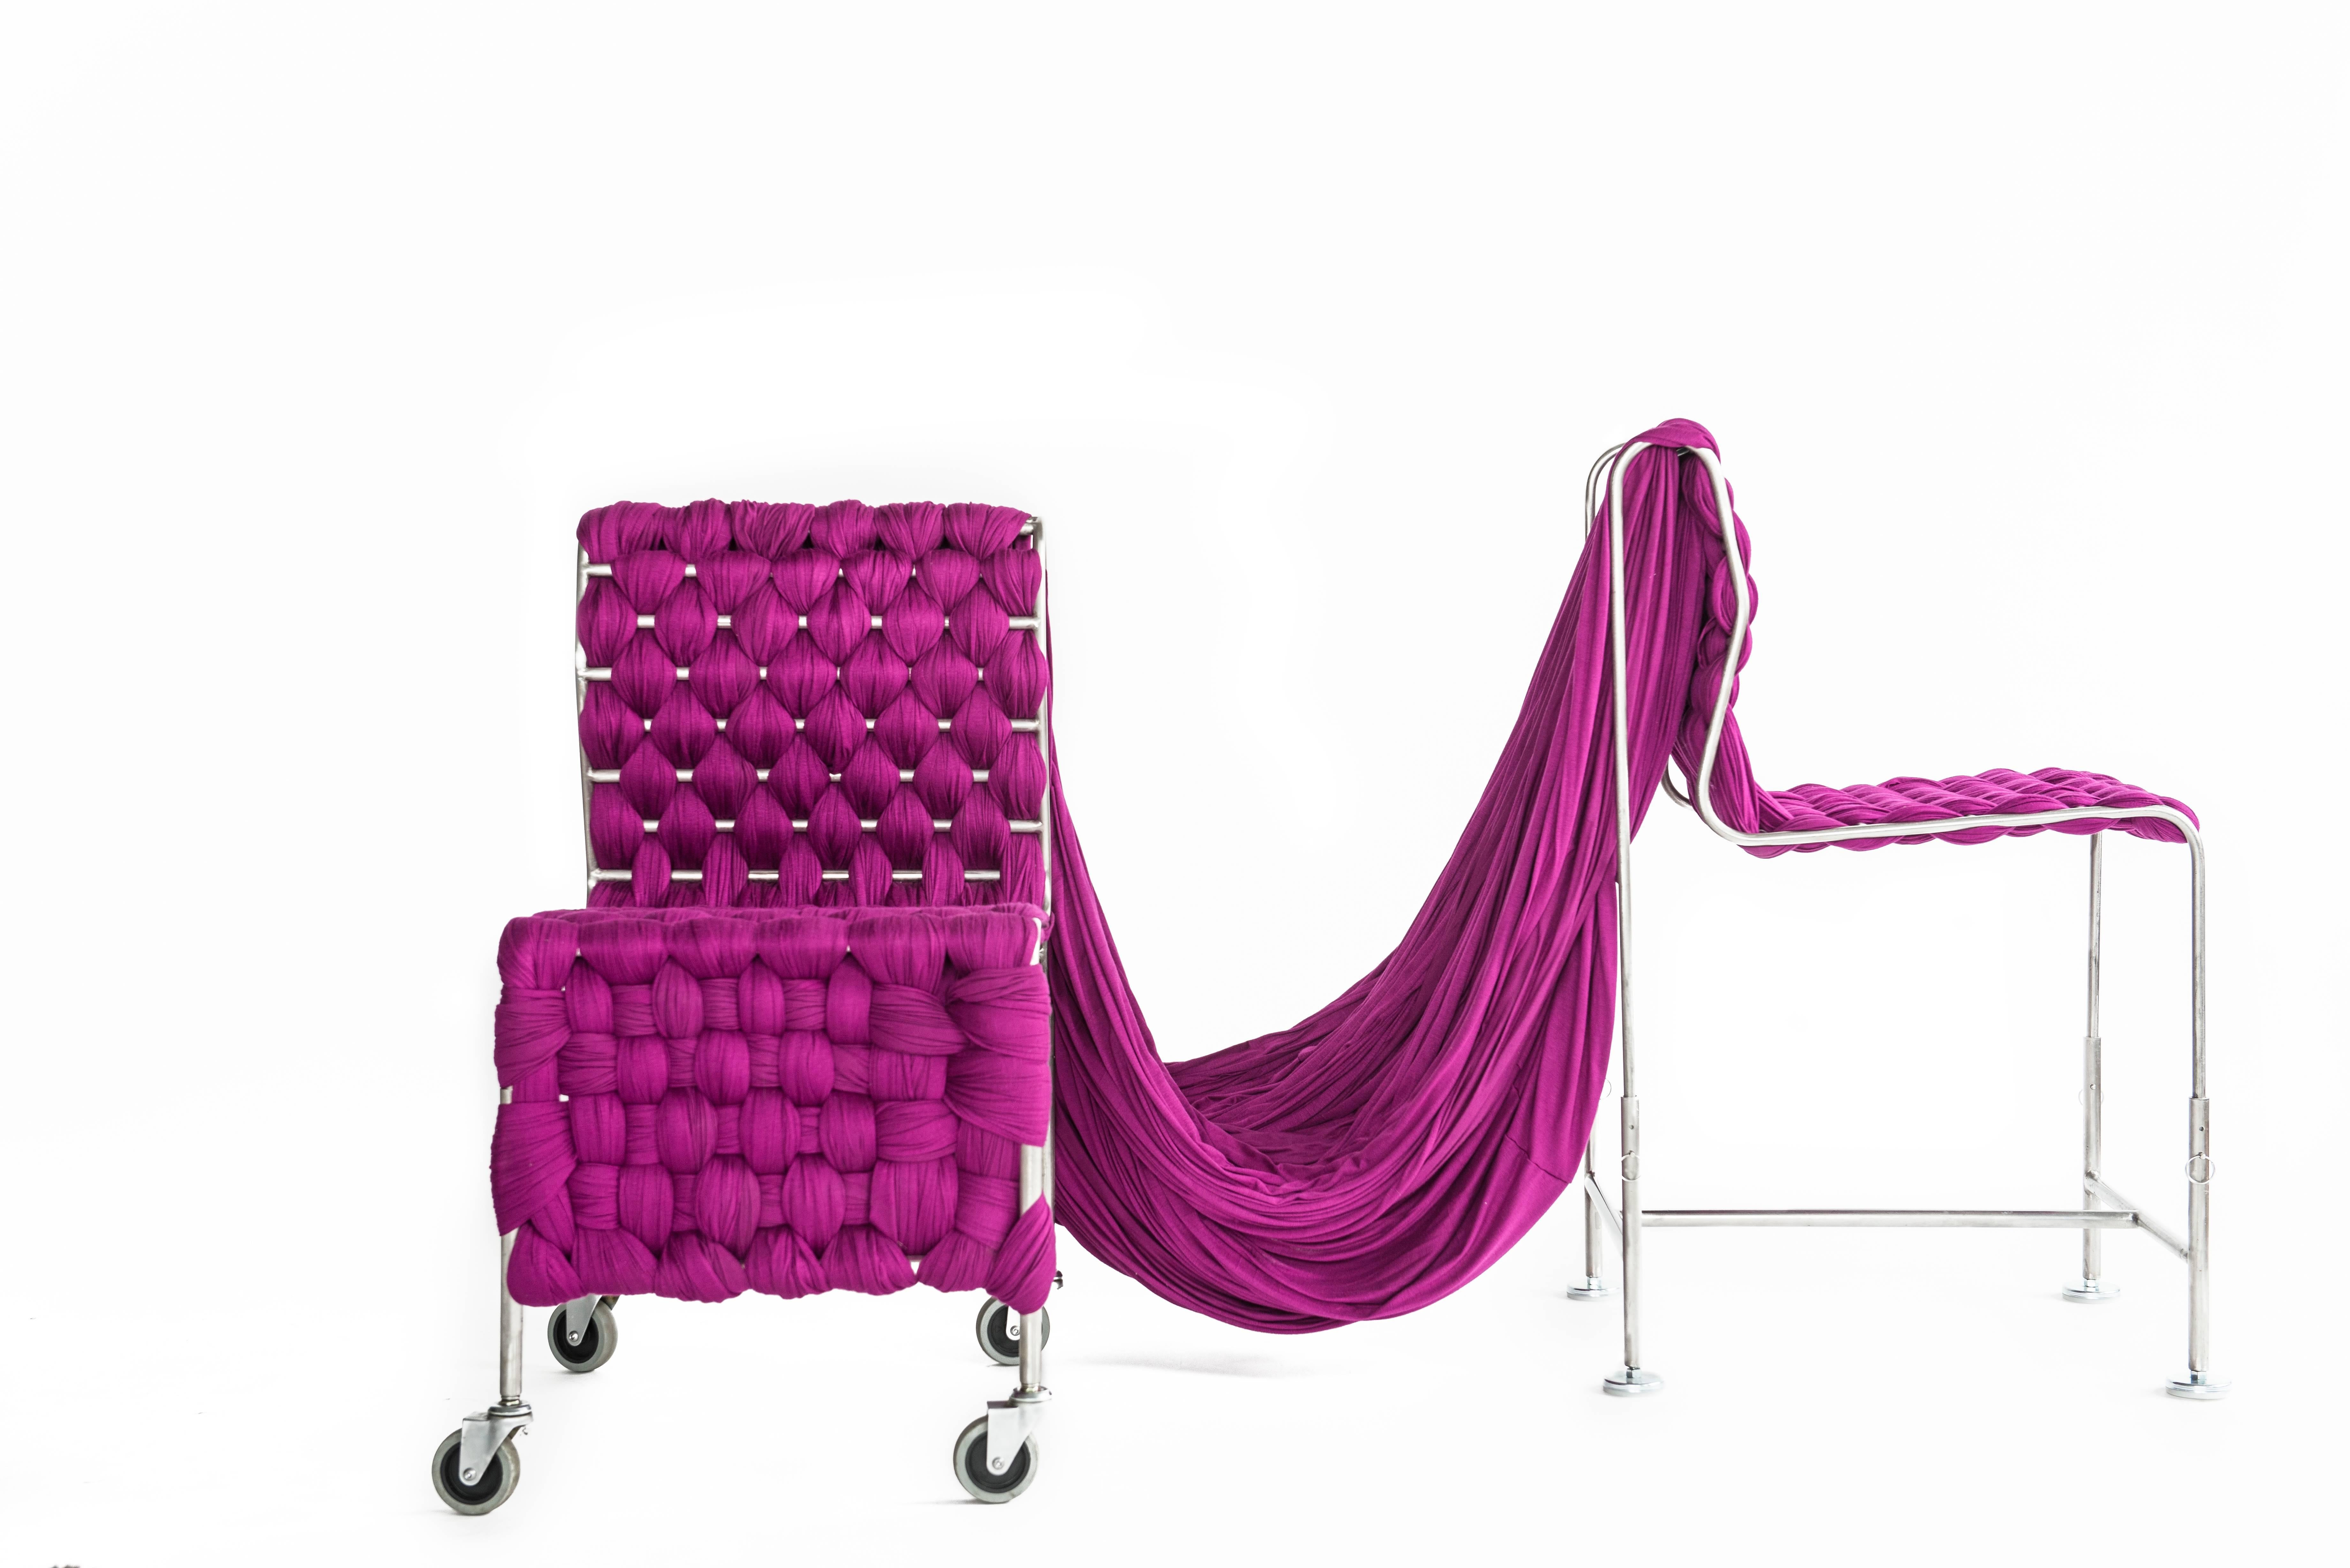 Chain chair pair in by Liz Collins and Harry Allen, USA, 2017

Chain chair pair
Liz Collins and Harry Allen, USA, 2017
Steel frame with violet jersey fabric
Short chair (on casters): H 34 in, W 18 in, D 21 in, seat H 20 in
Tall chair: H 36.5